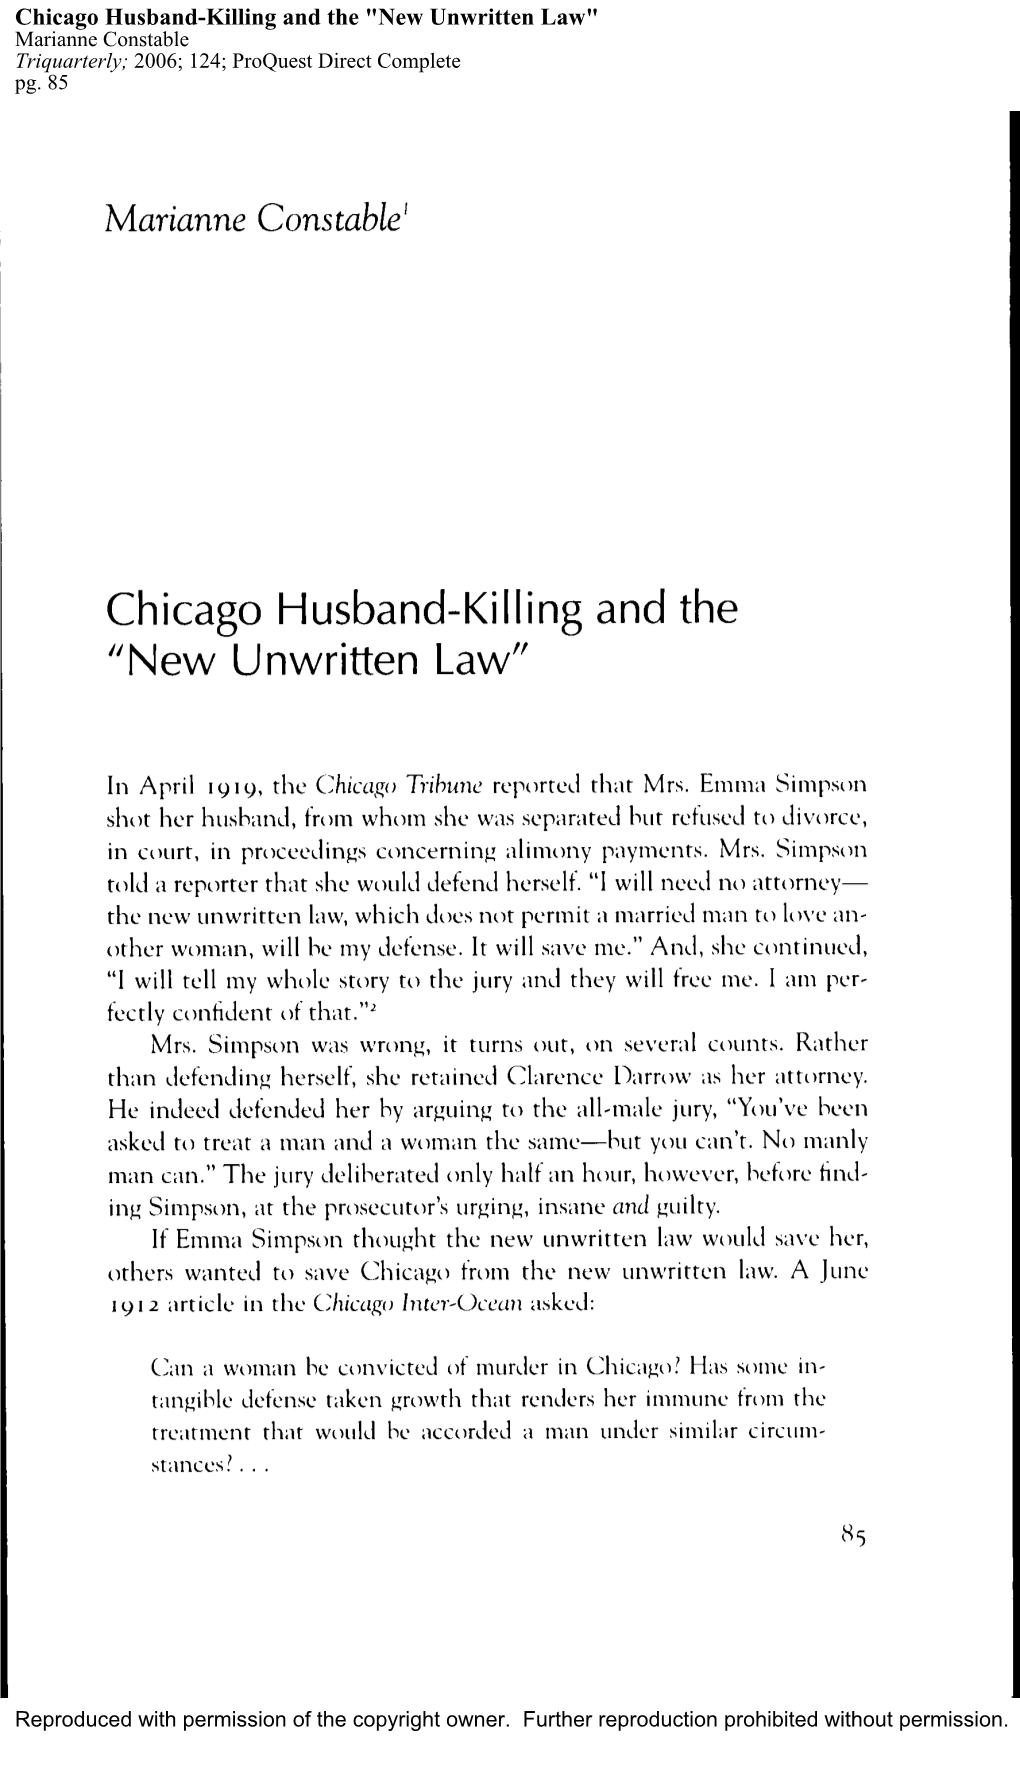 Chicago Husband-Killing and the "New Unwritten Law" Marianne Constable Triquarterly; 2006; 124; Proquest Direct Complete Pg